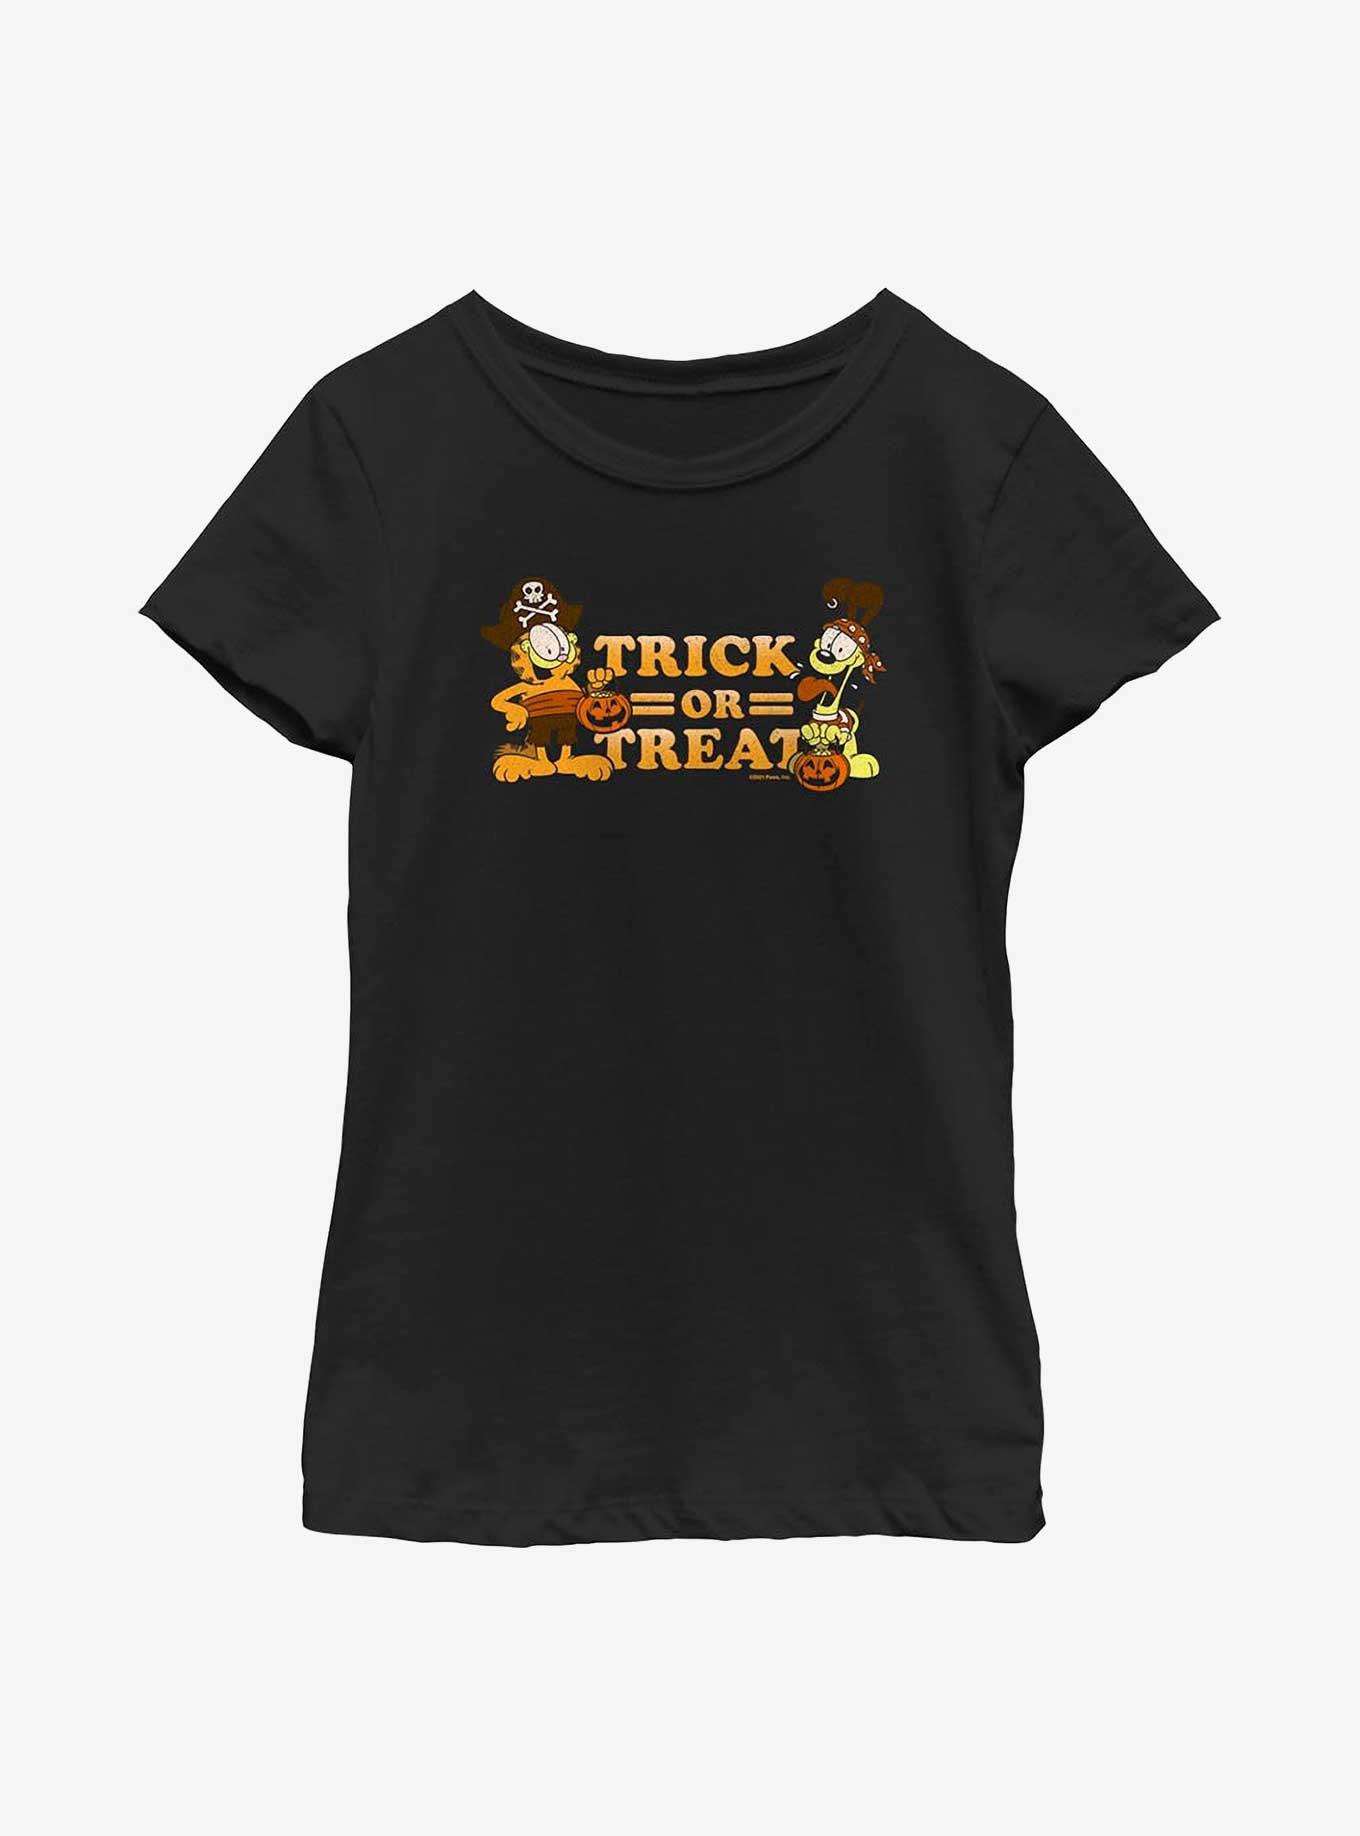 Garfield Trick Or Treat Youth Girl's T-Shirt, BLACK, hi-res